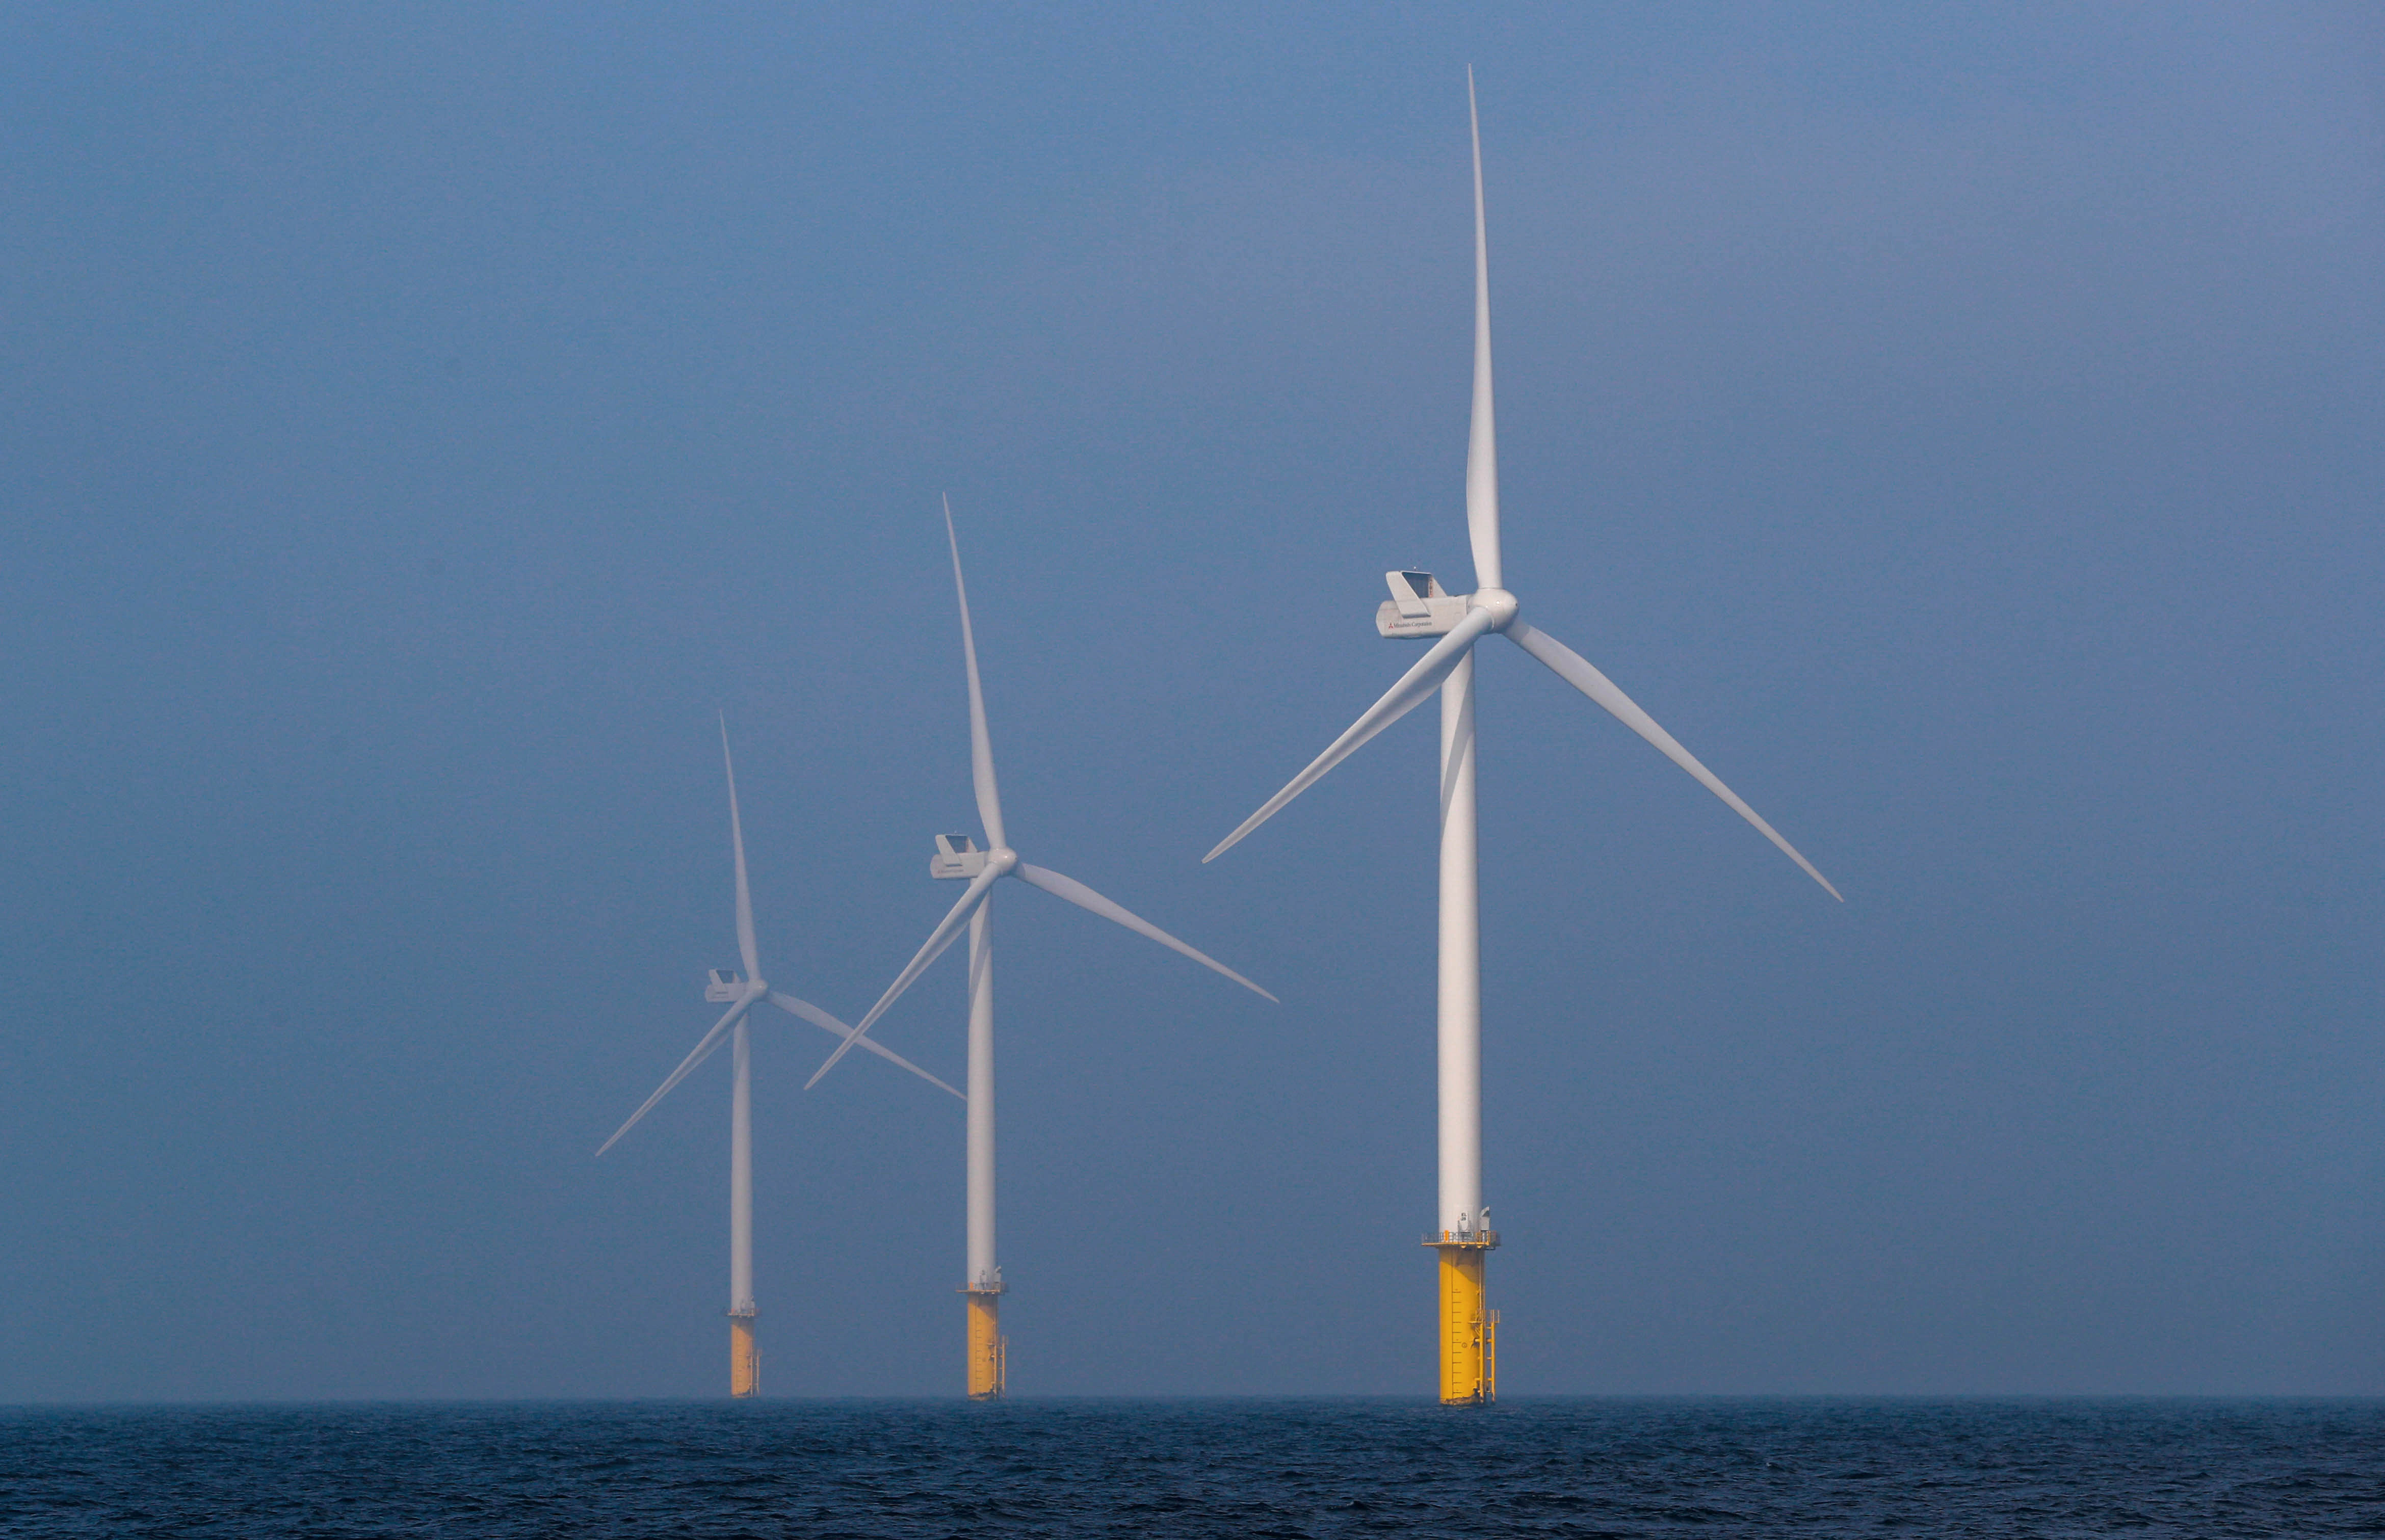 Power-generating windmill turbines are seen at the Eneco offshore Luchterduinen windfarm near Amsterdam